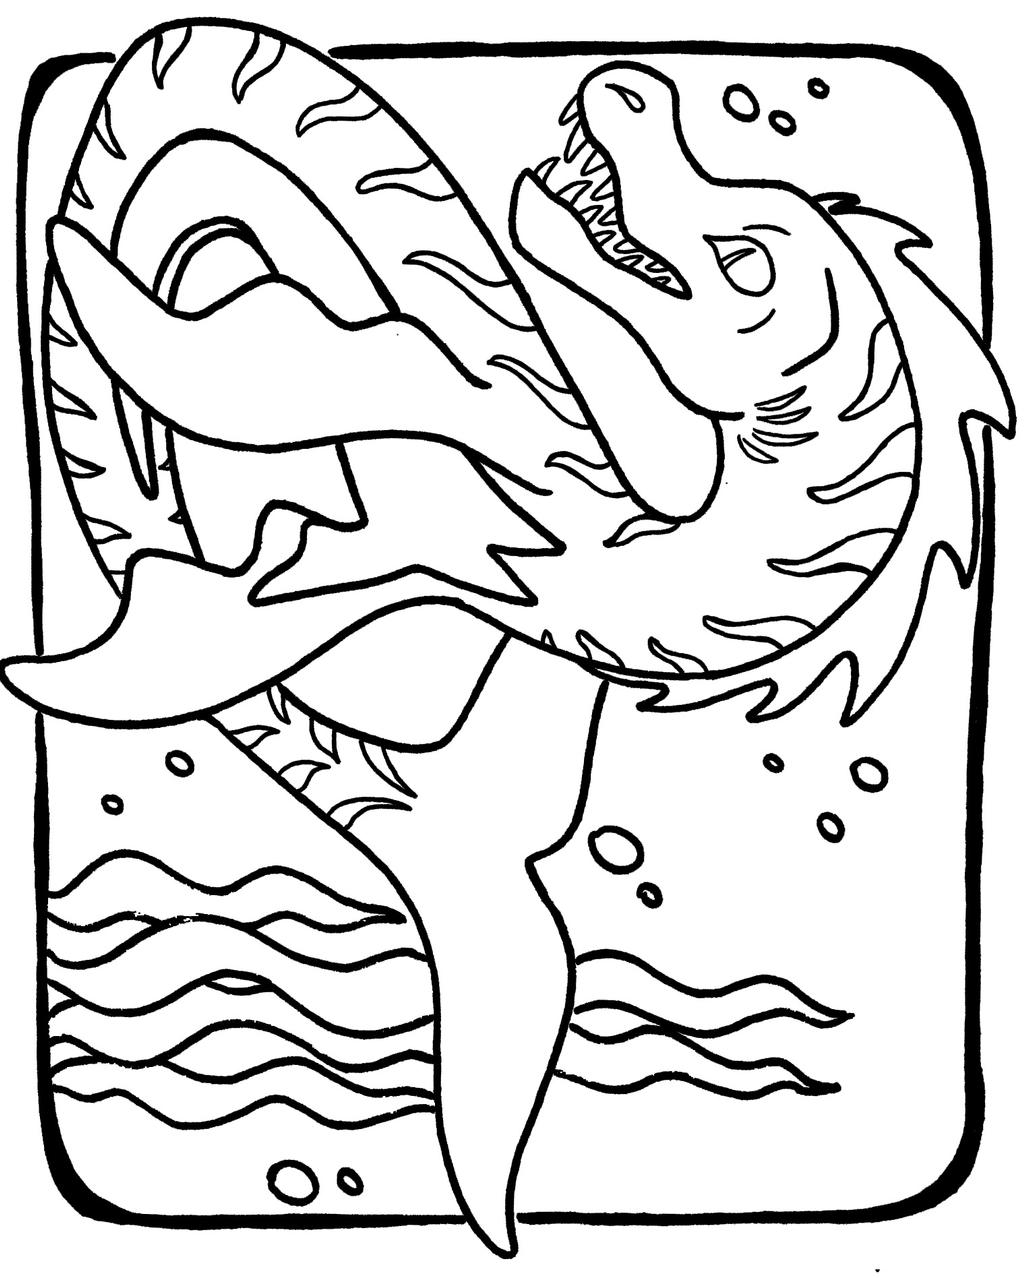 sae monster coloring pages - photo #11